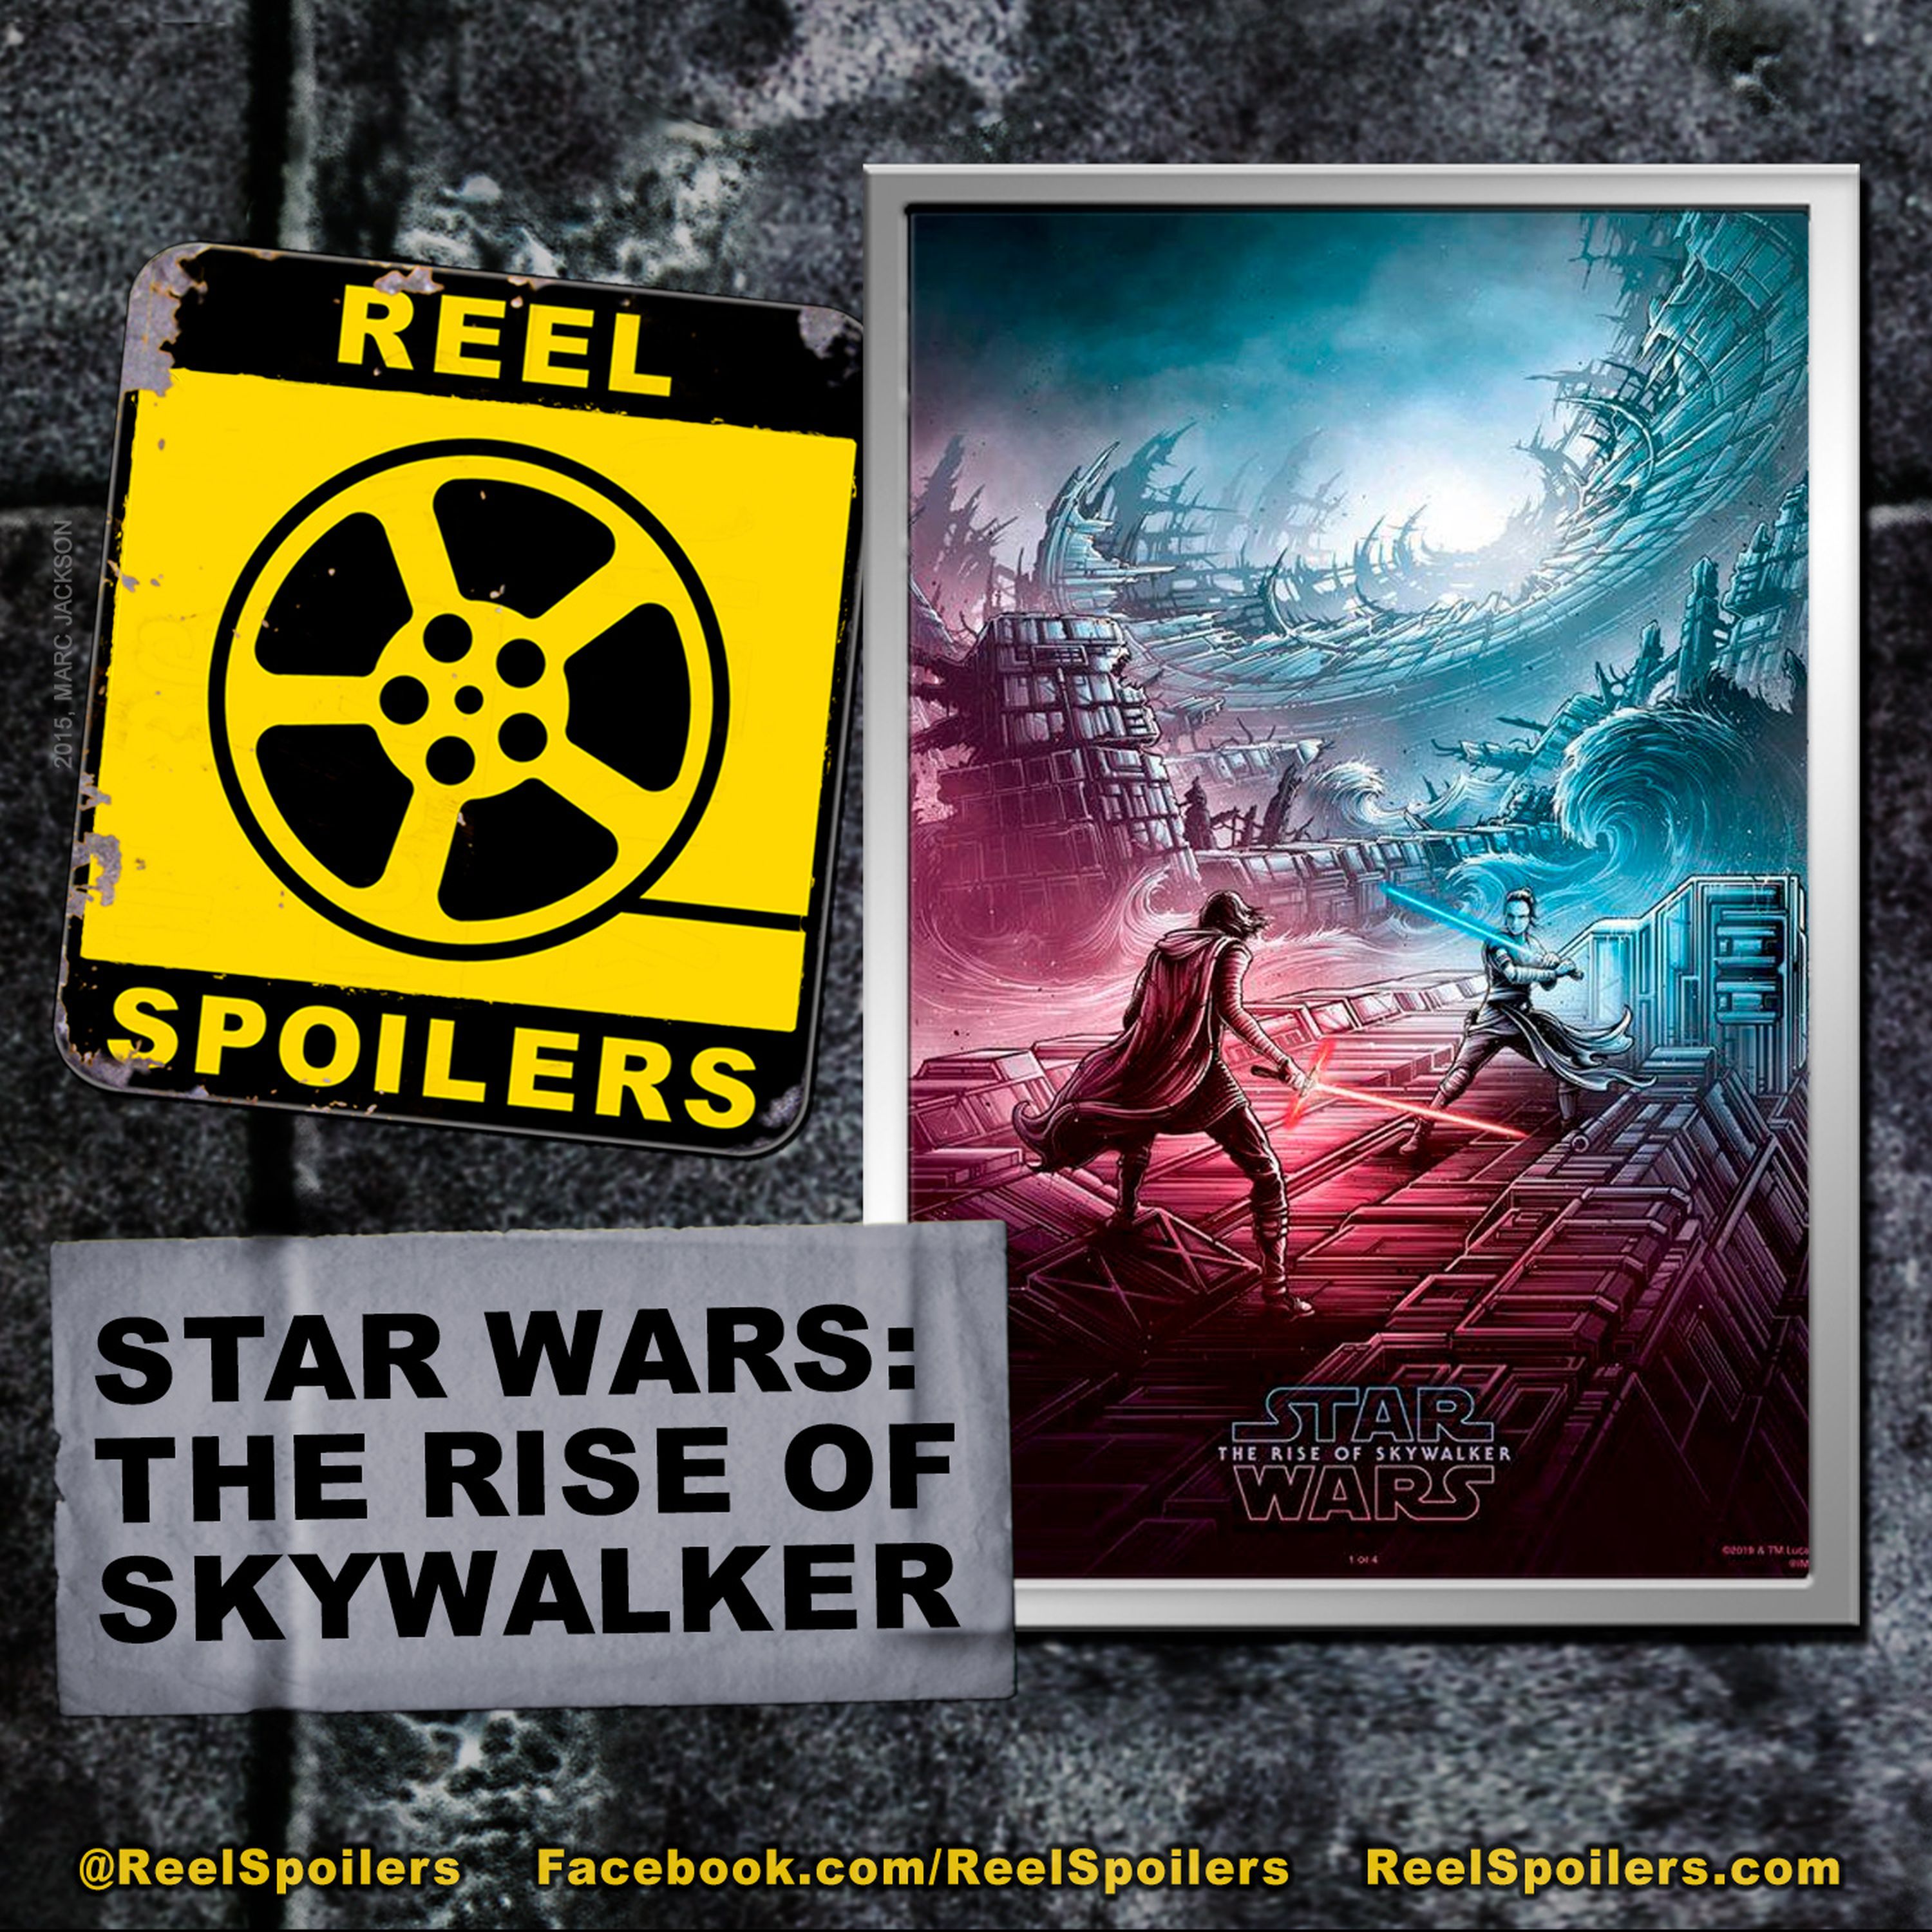 STAR WARS: THE RISE OF SKYWALKER Starring Daisy Ridley, Adam Driver, Anthony Daniels Image